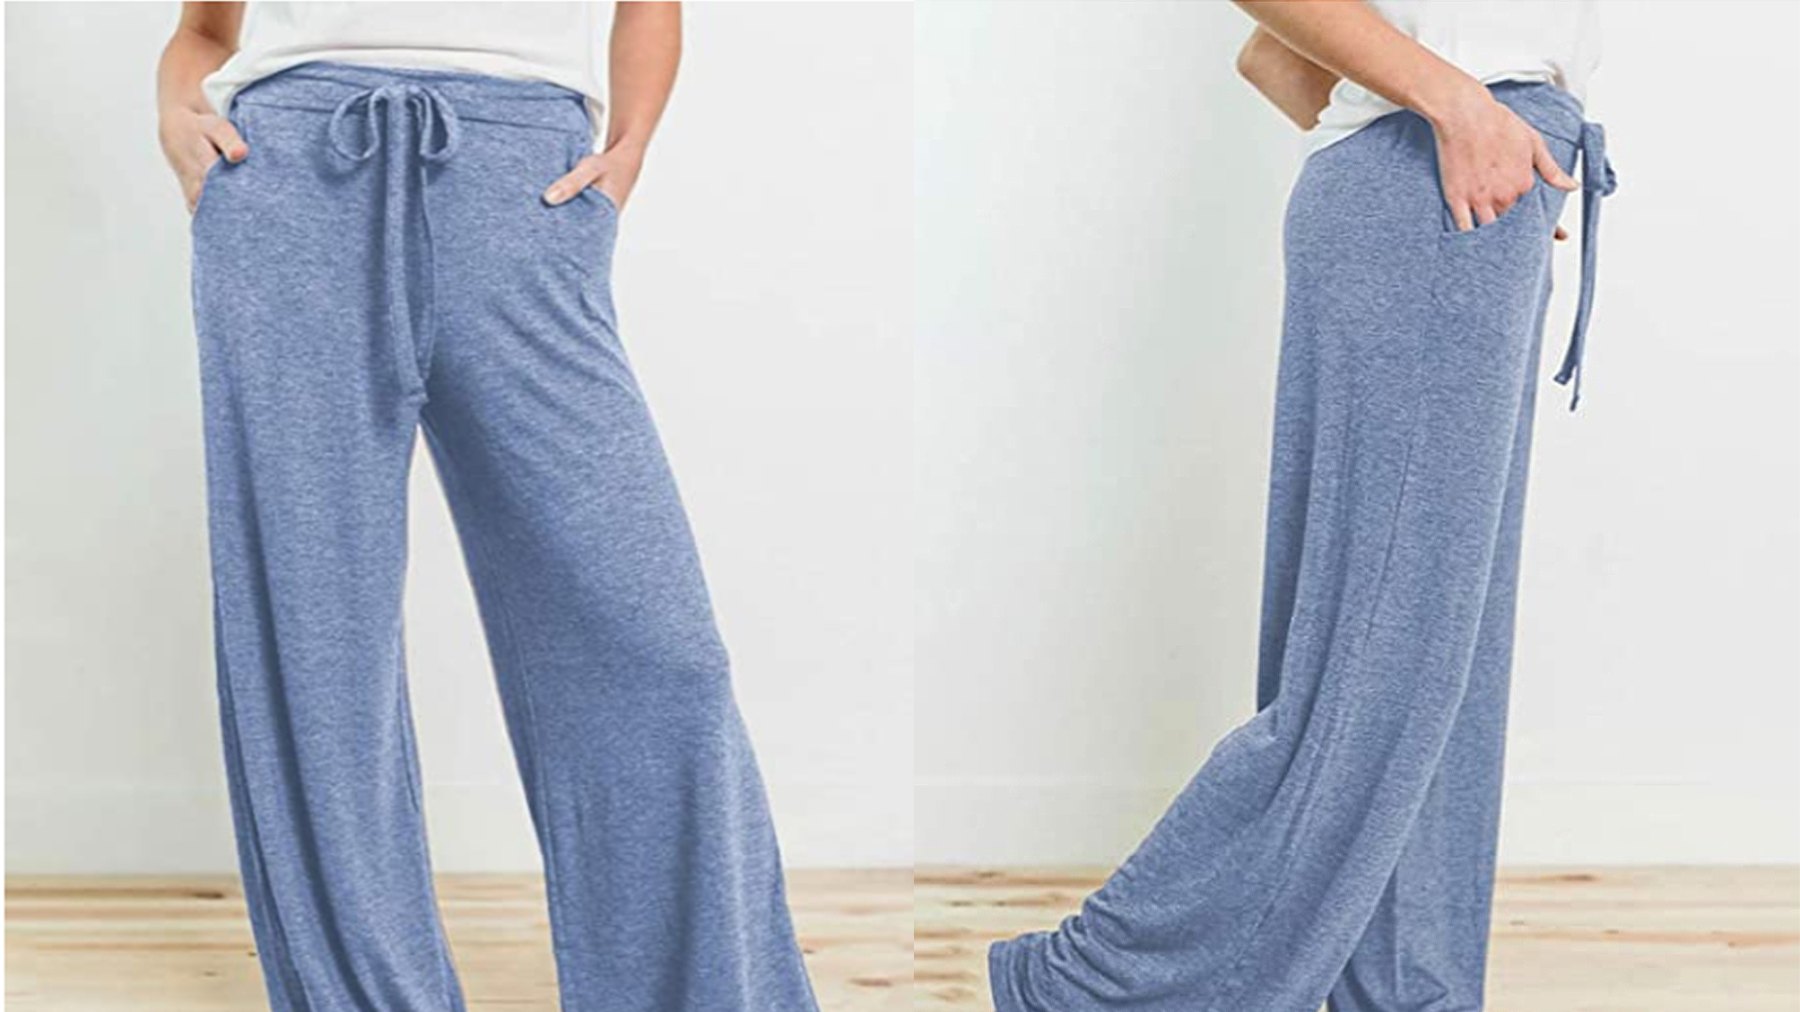 PRETTYGARDEN Soft Lounge Pants Are Even Cozier Than They Look | Us Weekly